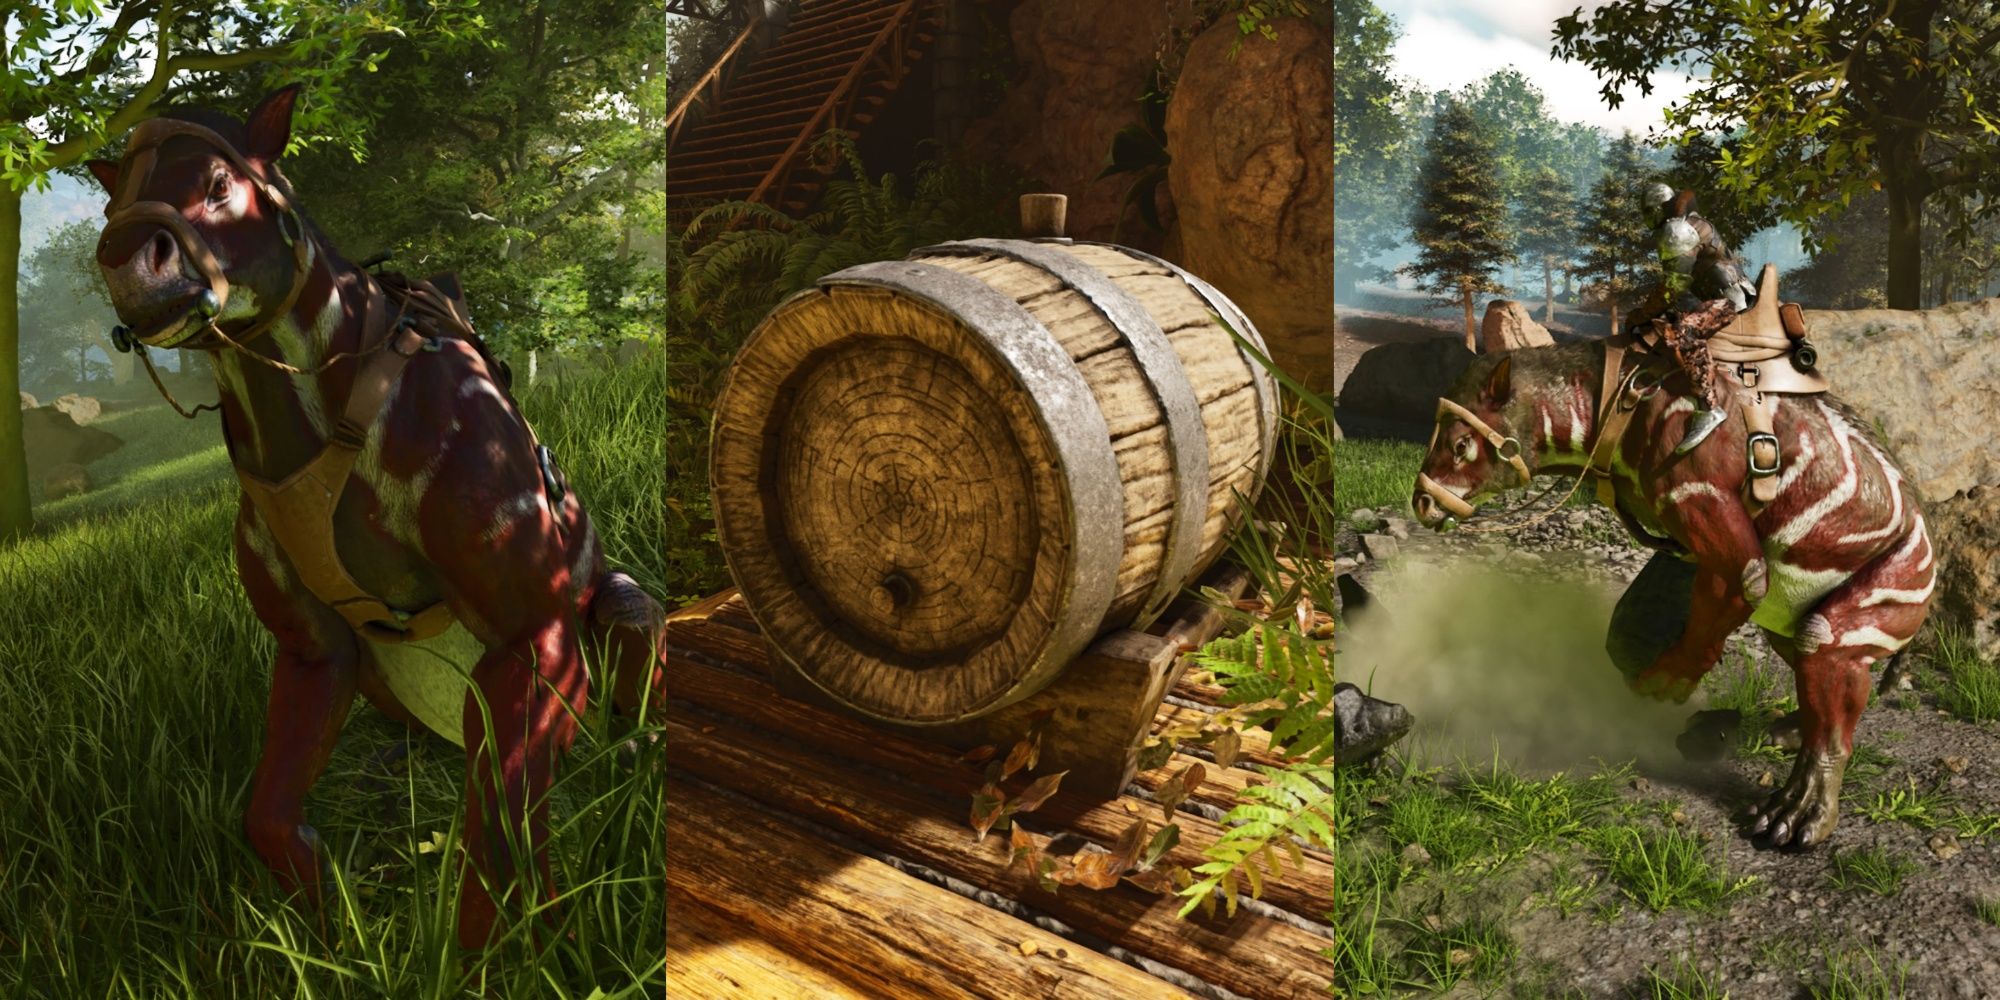 Split image featuring a tamed Chalicotherium sitting down in the grass, a Beer Barrel on a wooden foundation, and a player character riding a tamed Chalicotherium grabbing a rock in Ark: Survival Ascended.